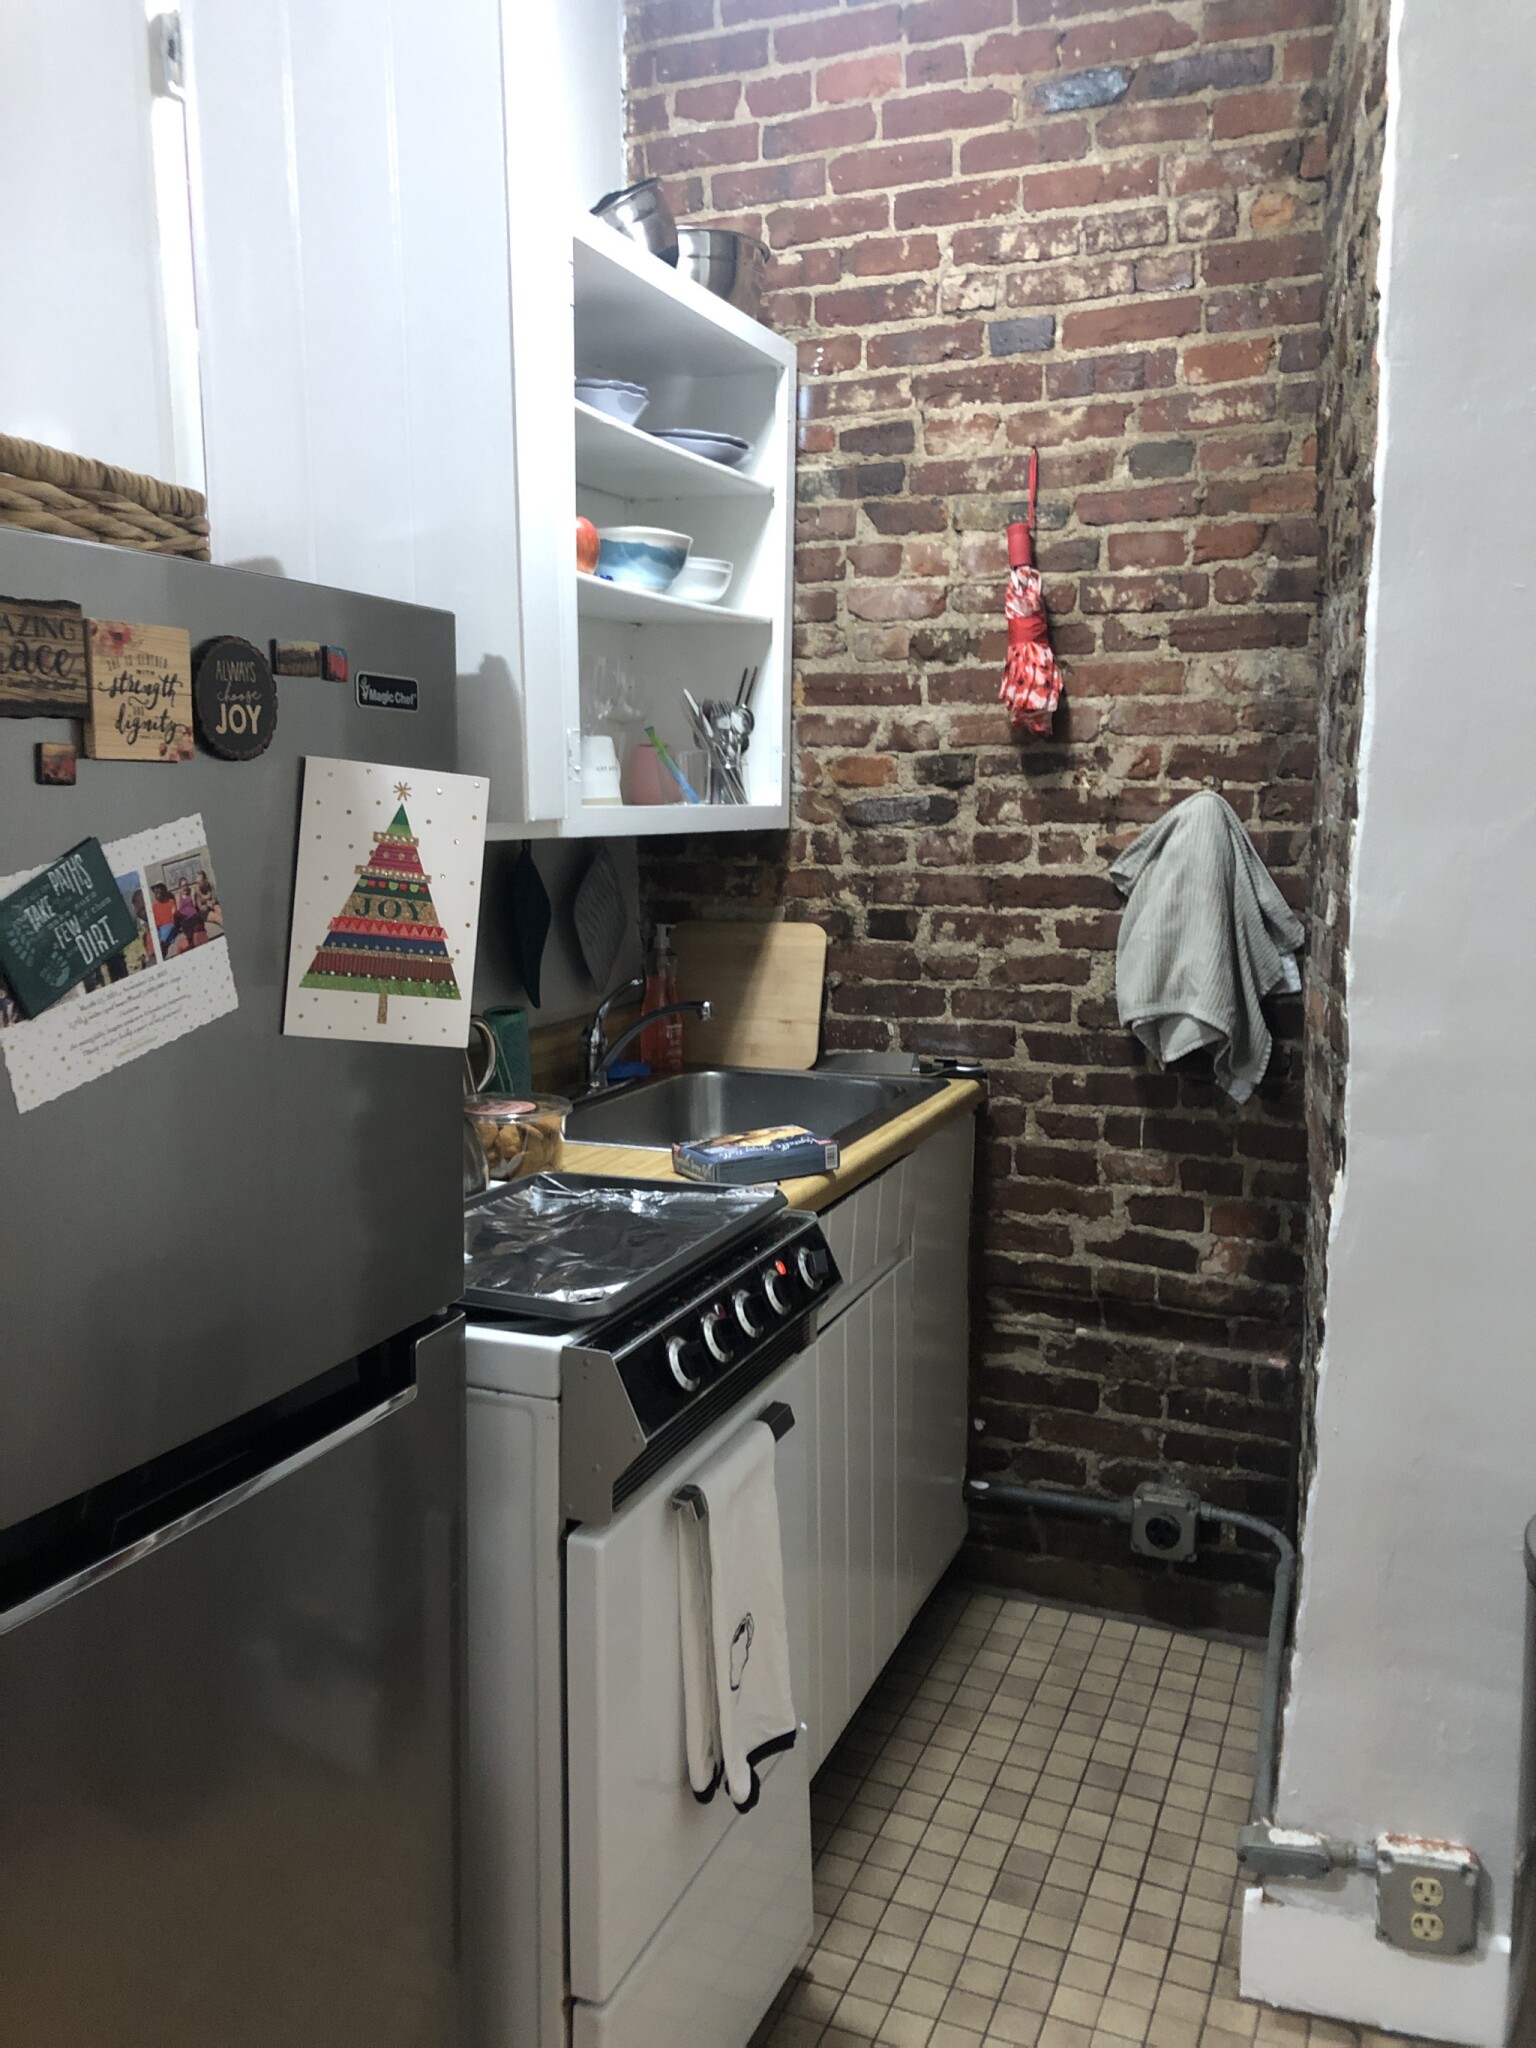 Pictures of  property for rent on Anderson St., Boston, MA 02114